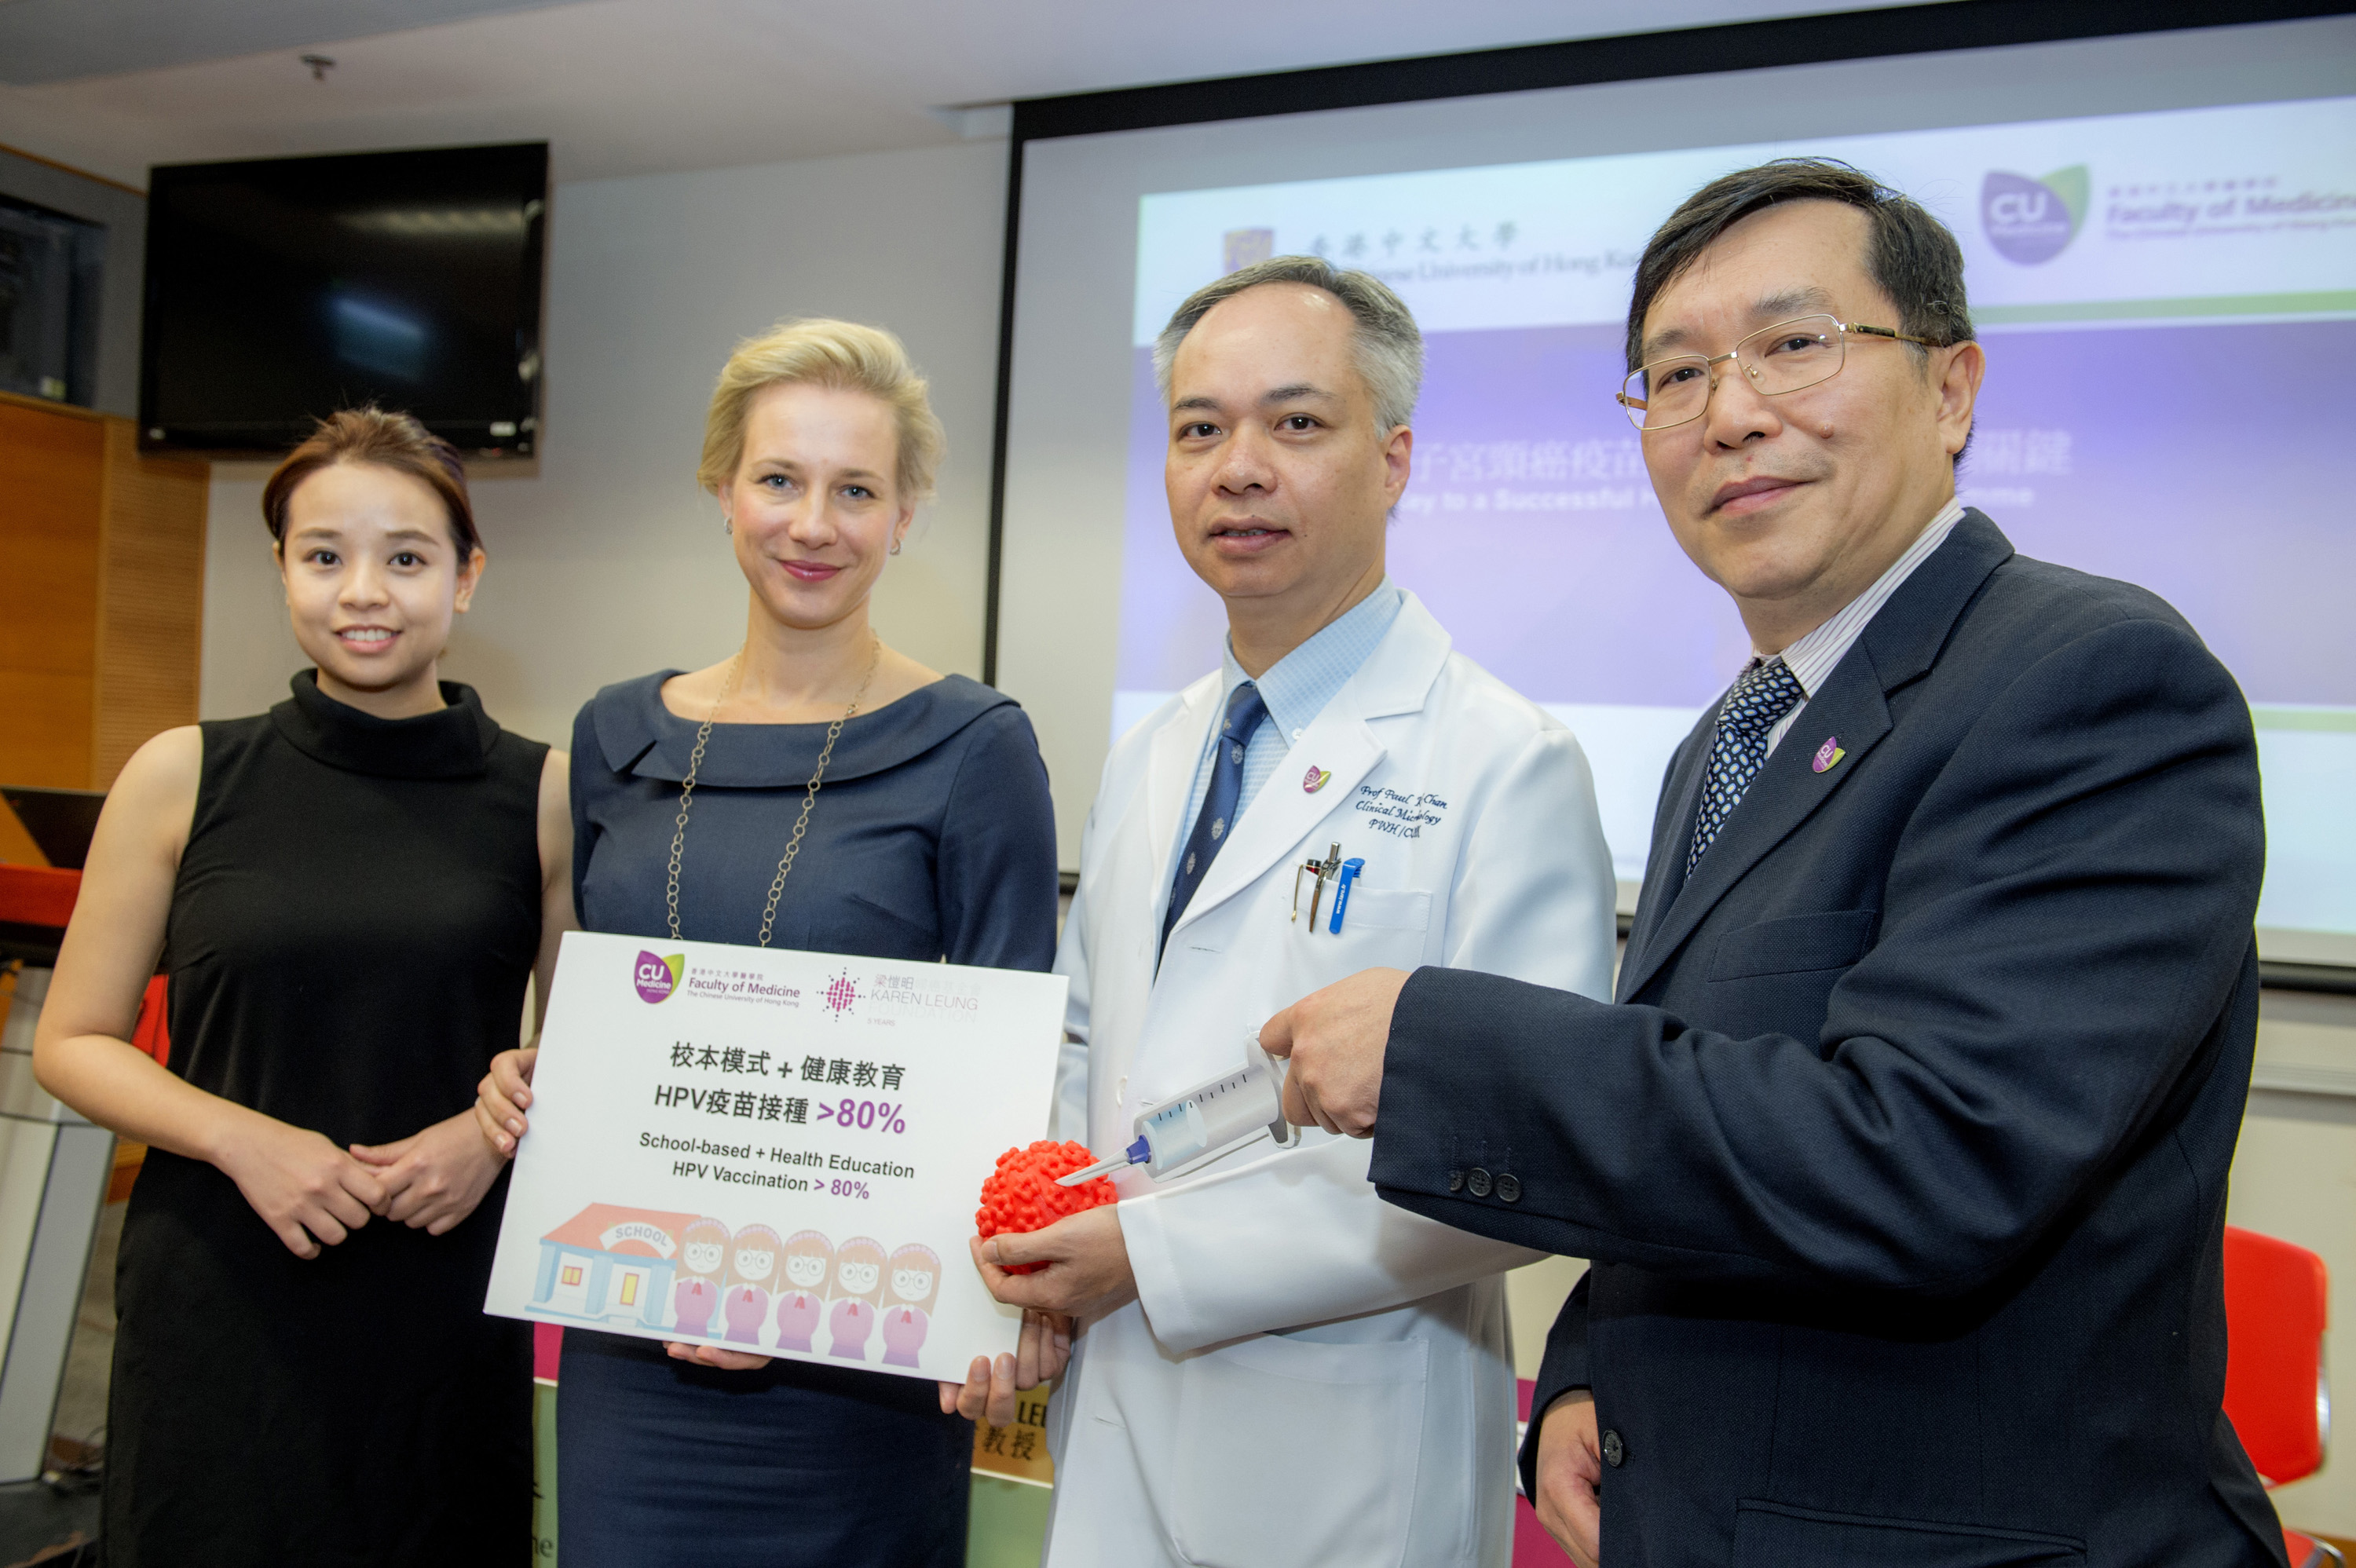 From right: Professor Albert LEE, Centre for Health Education and Health Promotion at The Jockey Club School of Public Health and Primary Care and Professor Paul Kay Sheung CHAN, Department of Microbiology from CUHK Medicine; Ms. Katharina REIMER, Executive Director and Ms. Sunny YANG, Healthcare Program Manager from the Karen Leung Foundation